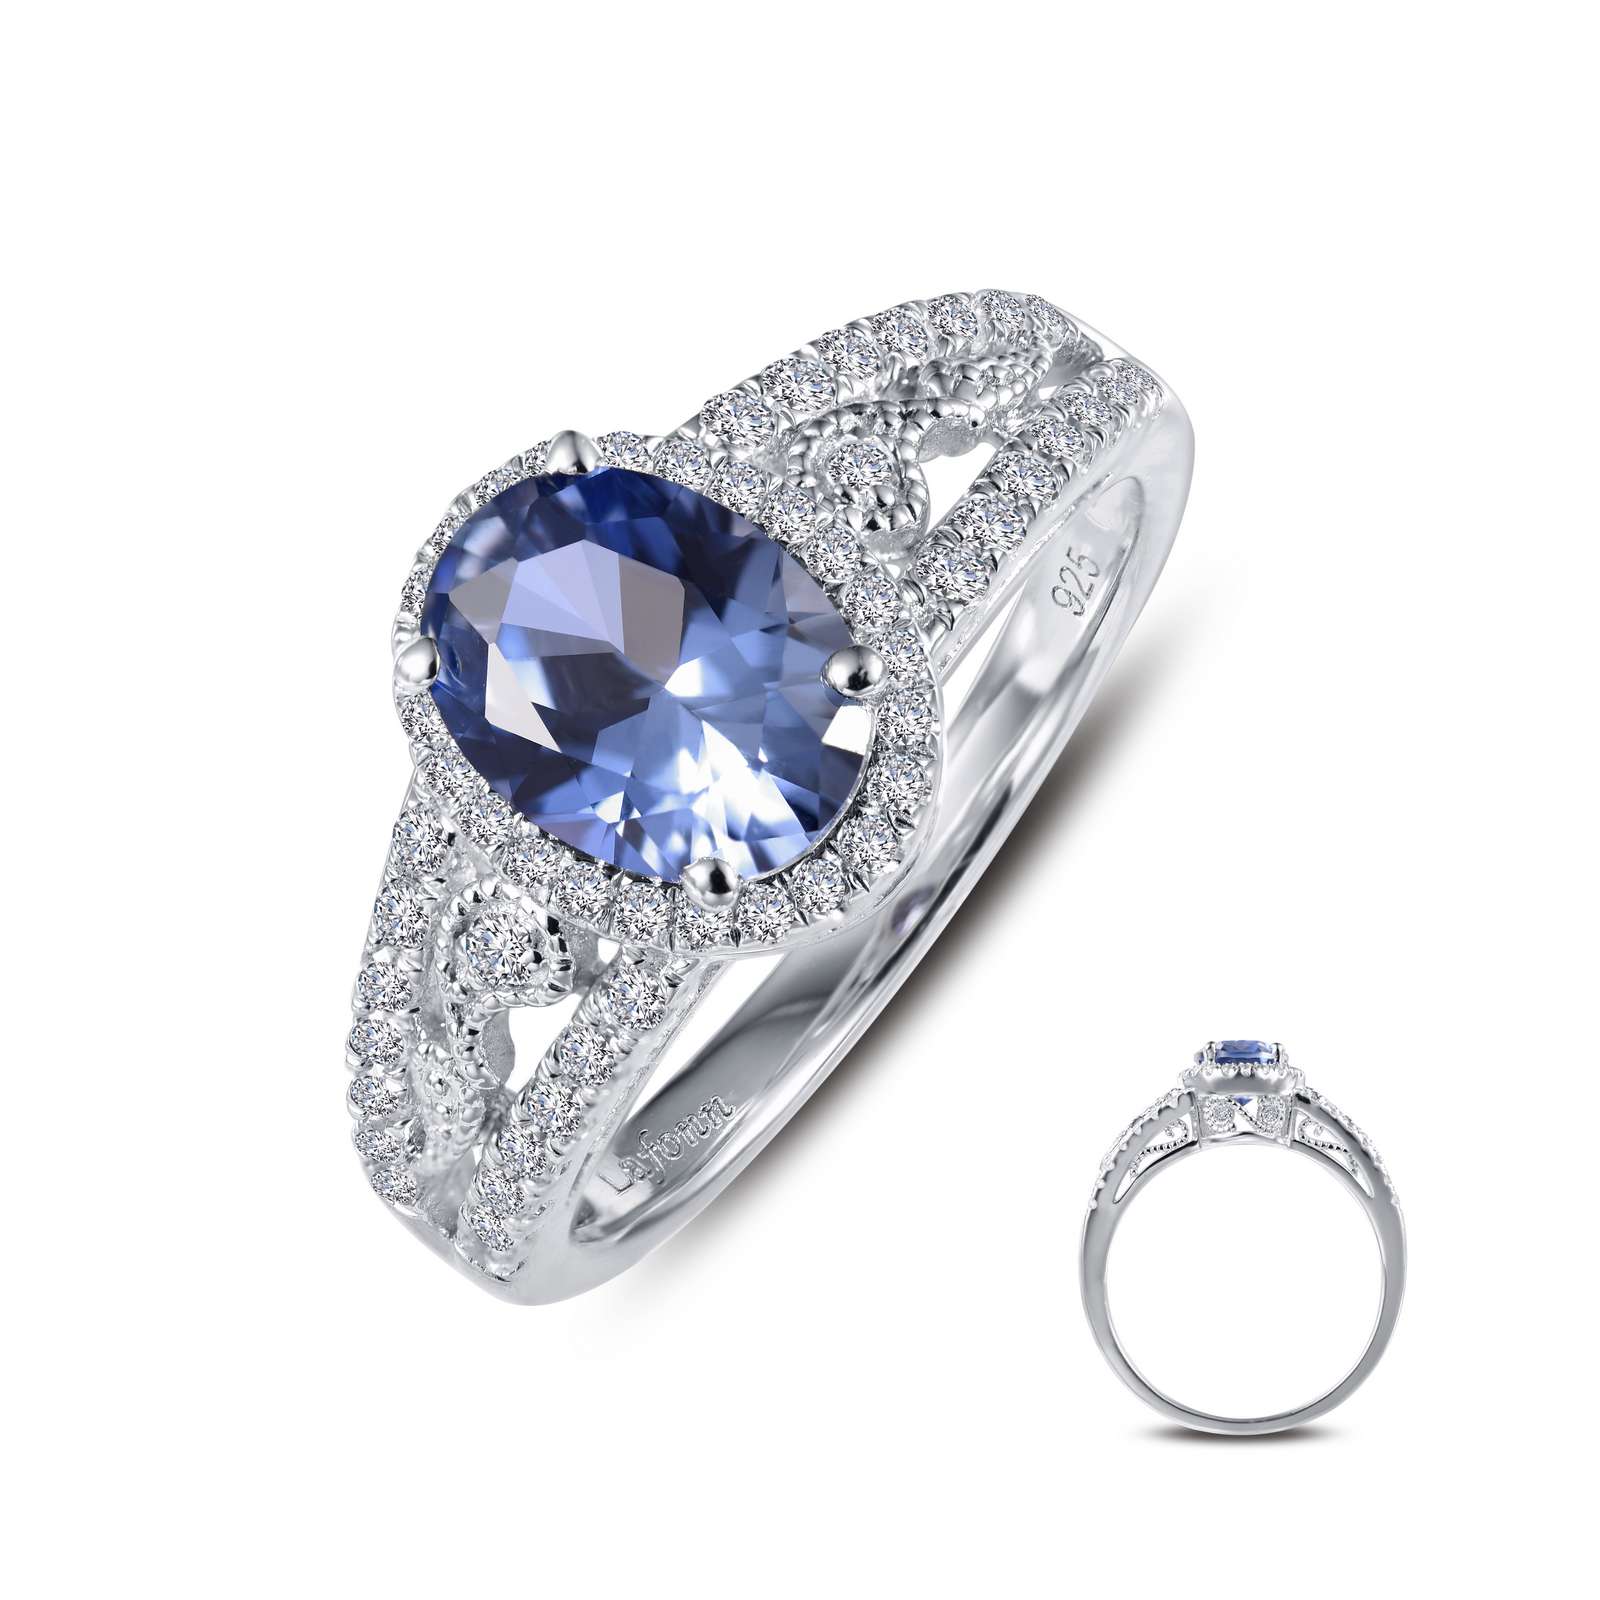 Heritage Tanzanite Platinum Bonded Ring Griner Jewelry Co. Moultrie, GA